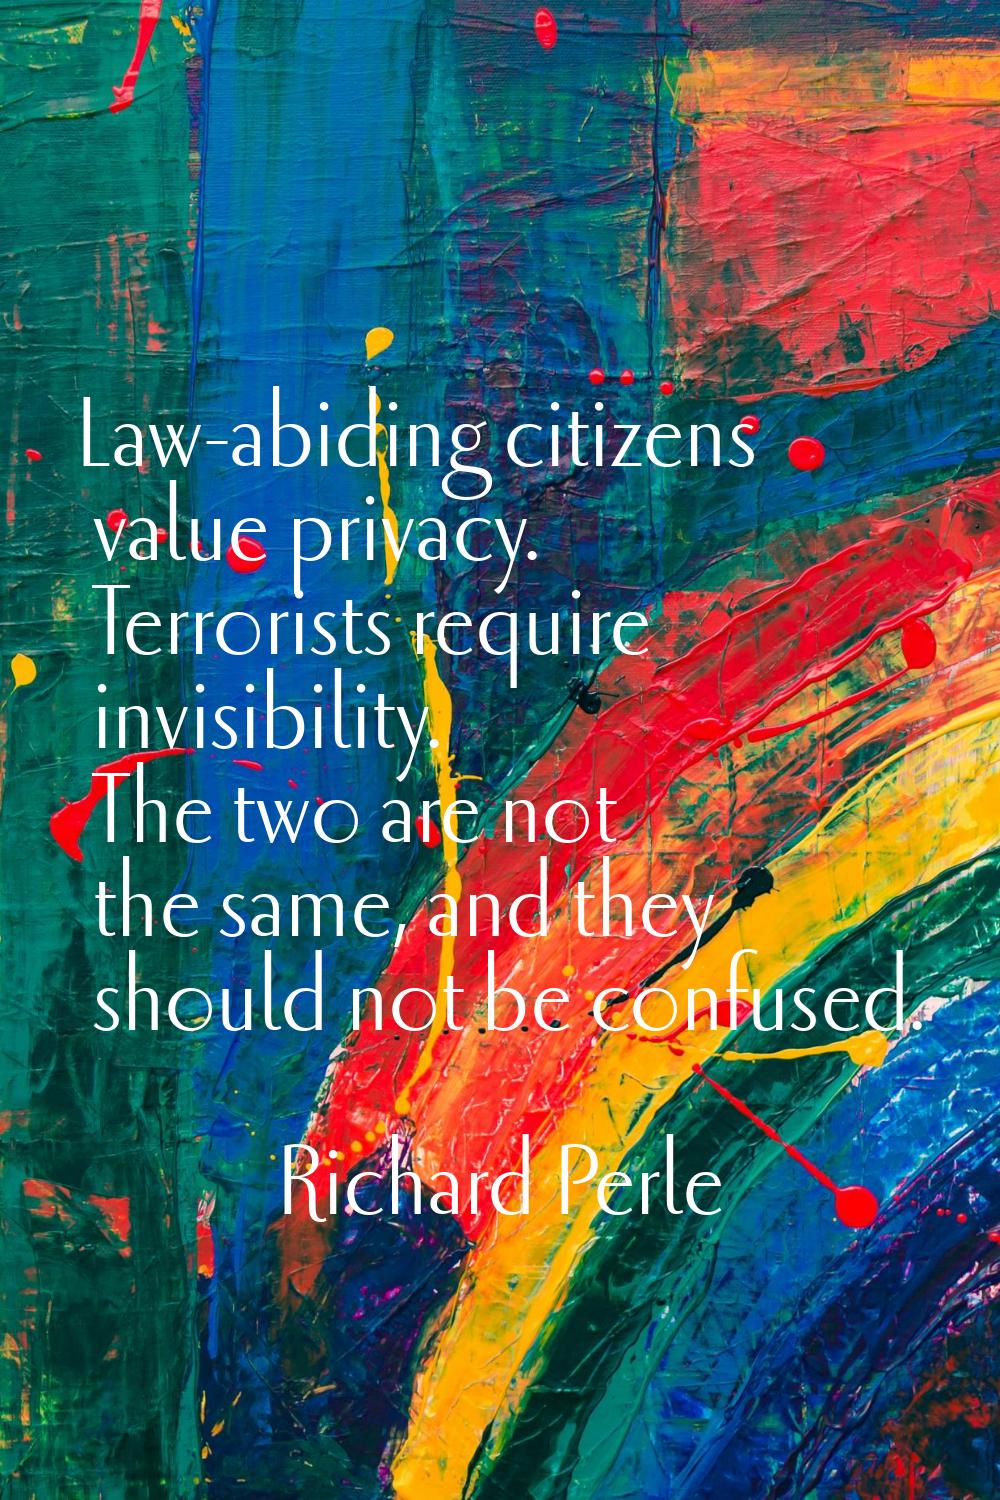 Law-abiding citizens value privacy. Terrorists require invisibility. The two are not the same, and 